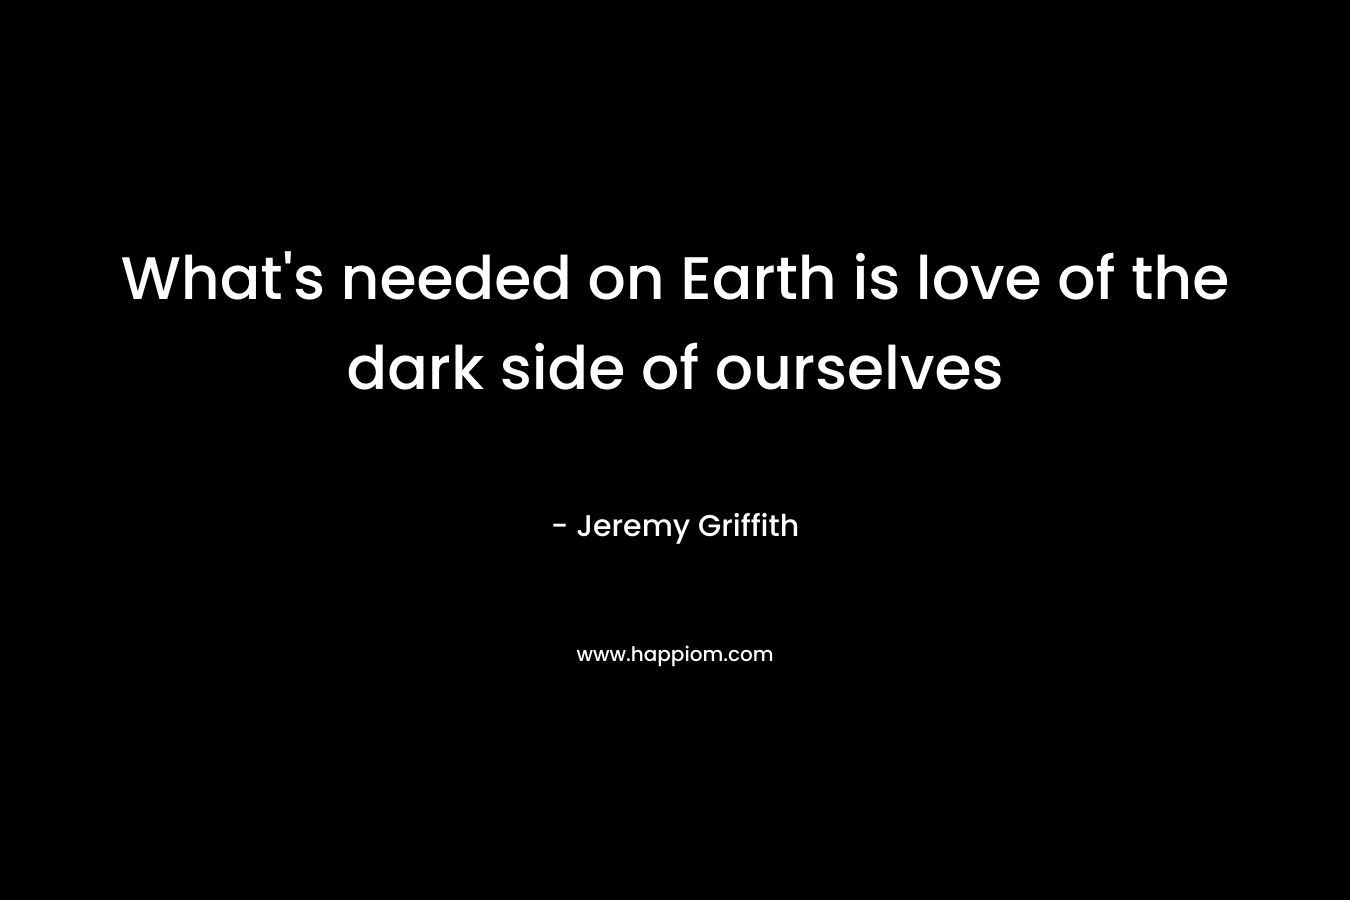 What's needed on Earth is love of the dark side of ourselves